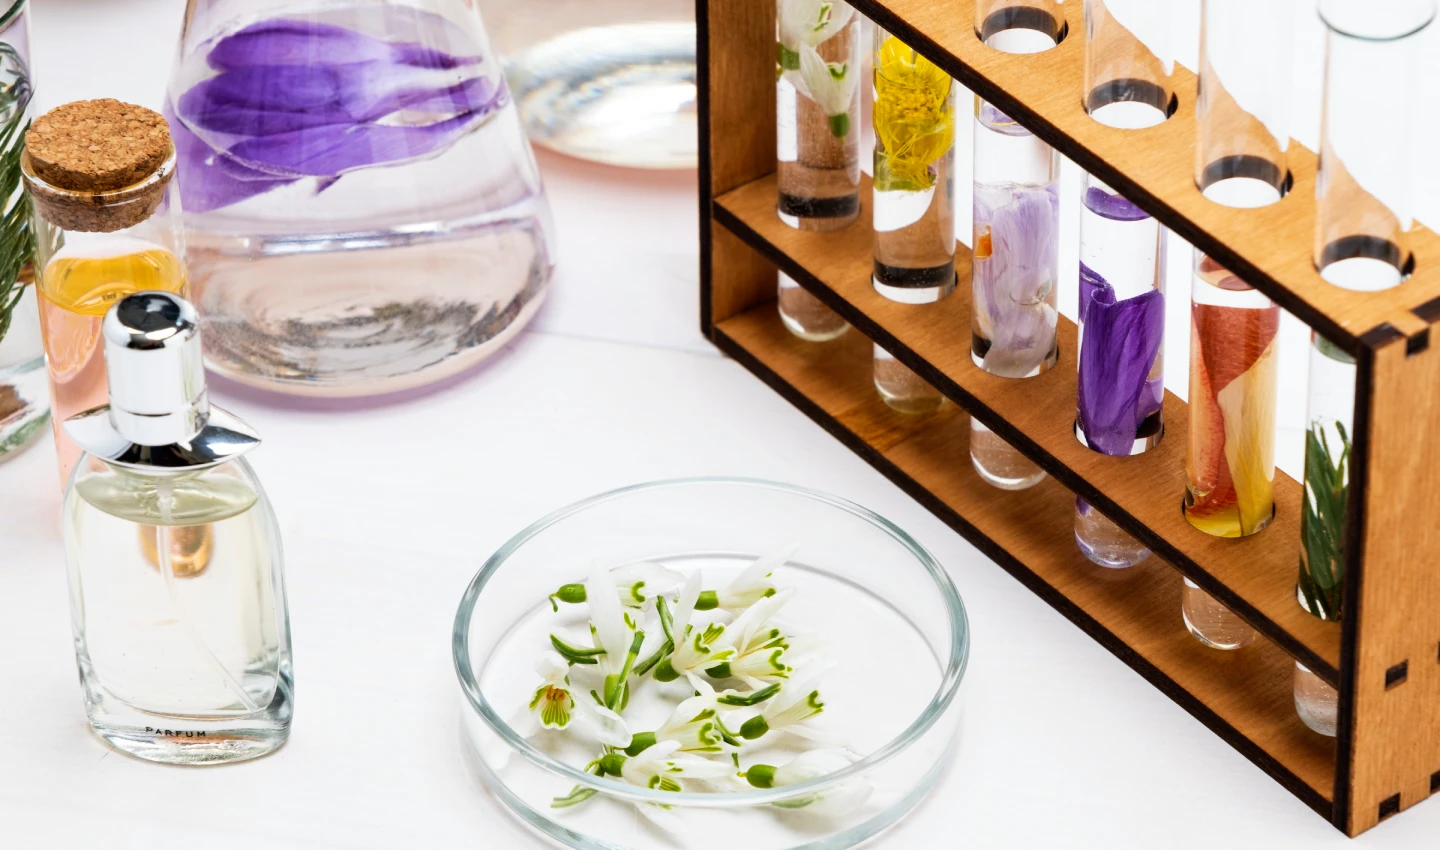 Various synthetic ingredients used in perfume production, illustrating the complexities of creating modern fragrances